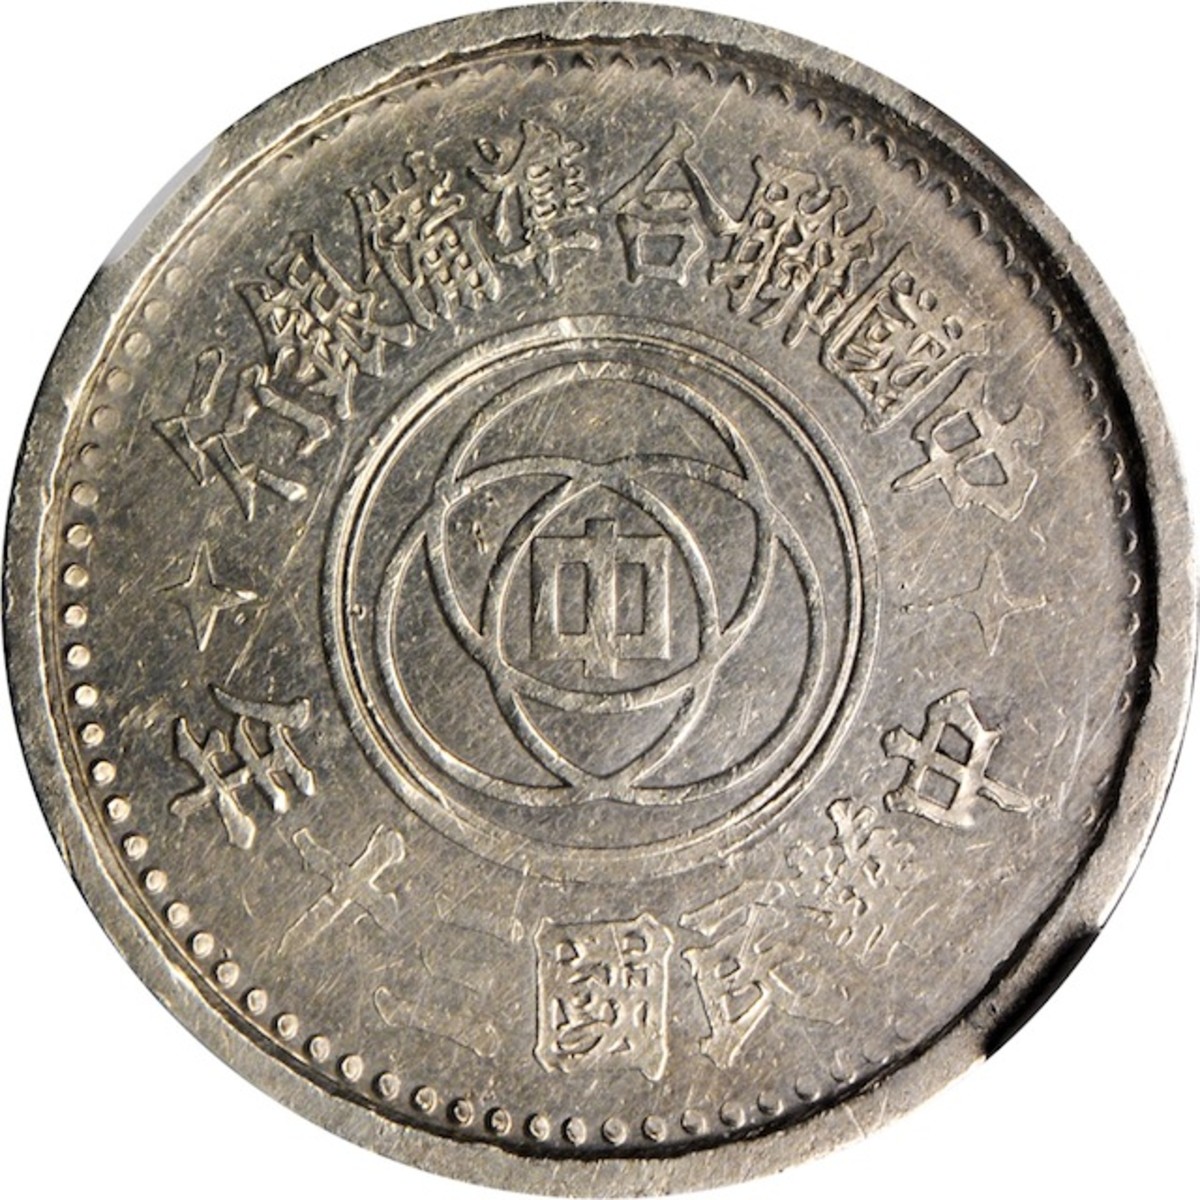 Obverse to the World War II Federal Reserve Bank of China five fen silver pattern